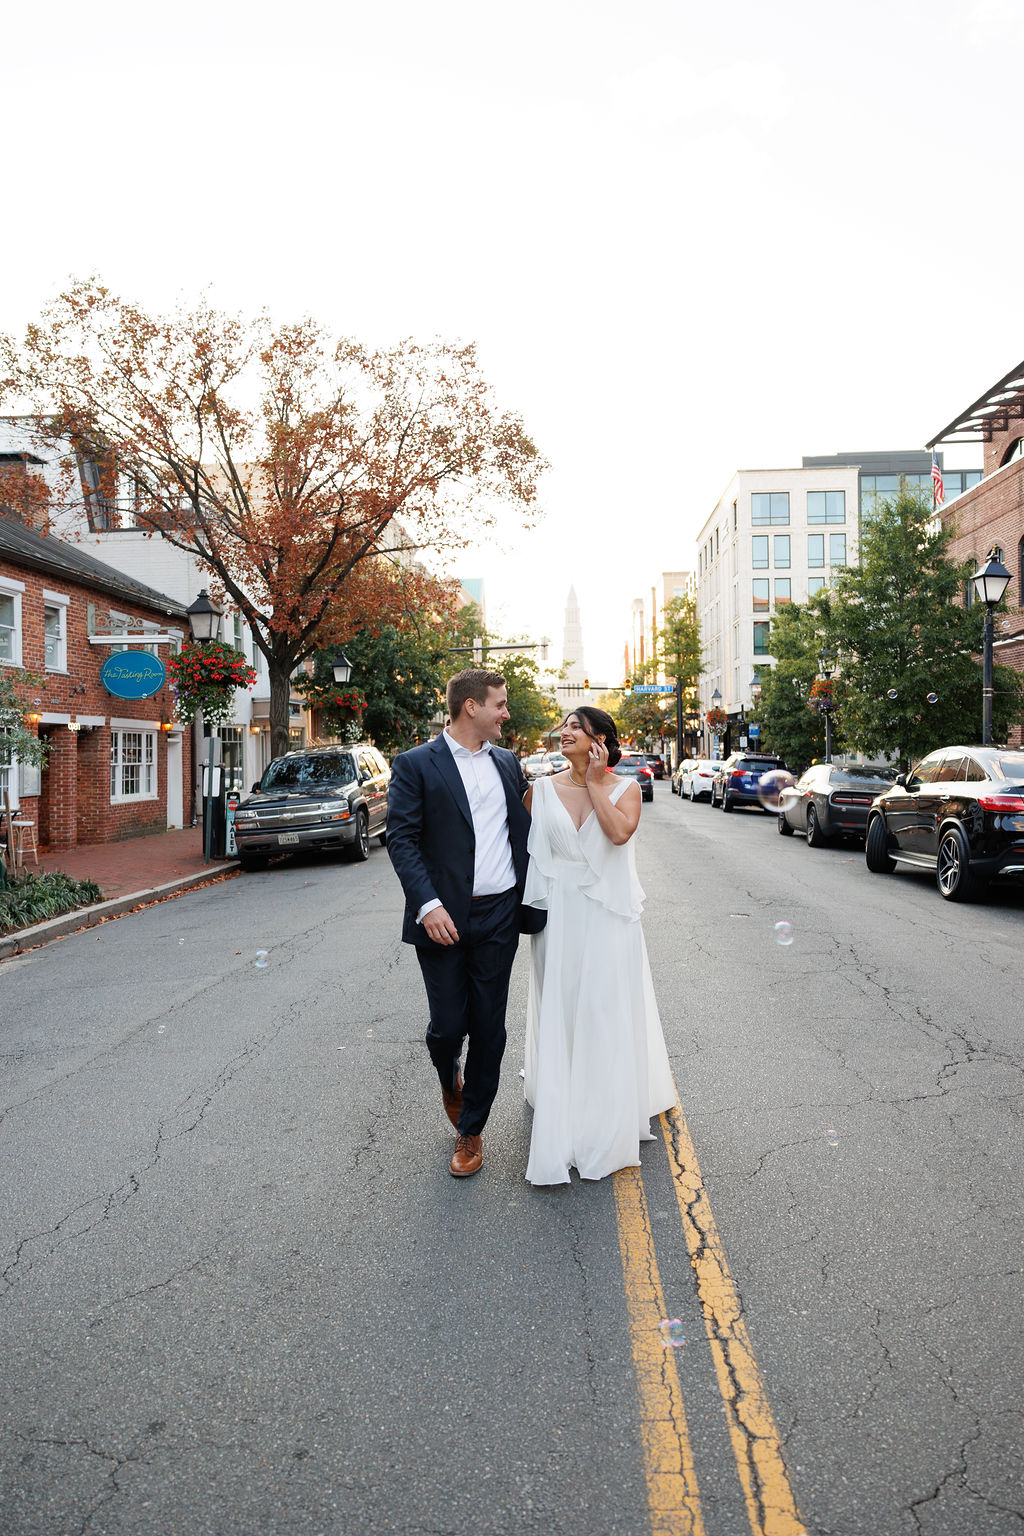 Newlyweds hold hands and walk together down a quiet street